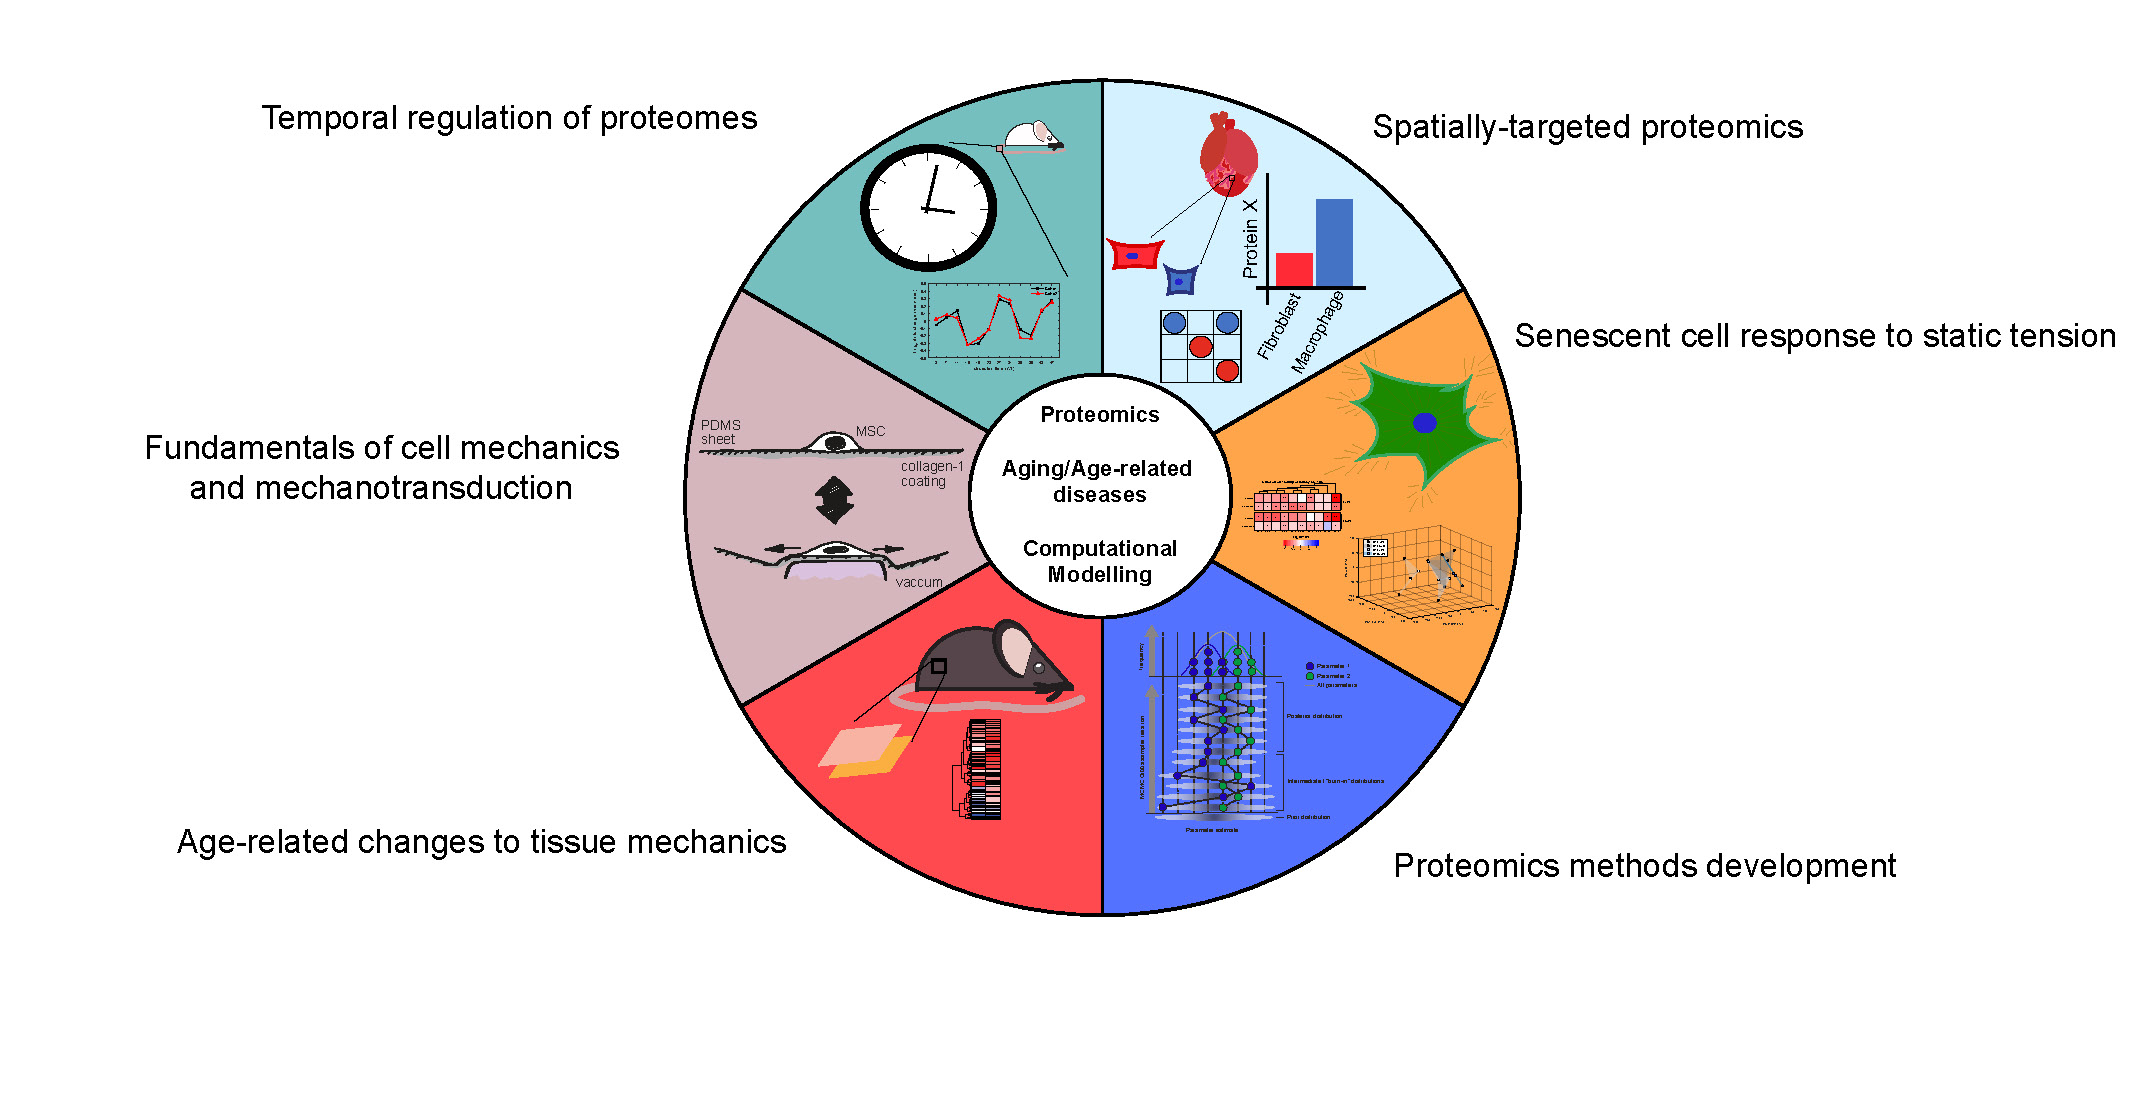 Proteomics, ageing and mechanotransduction